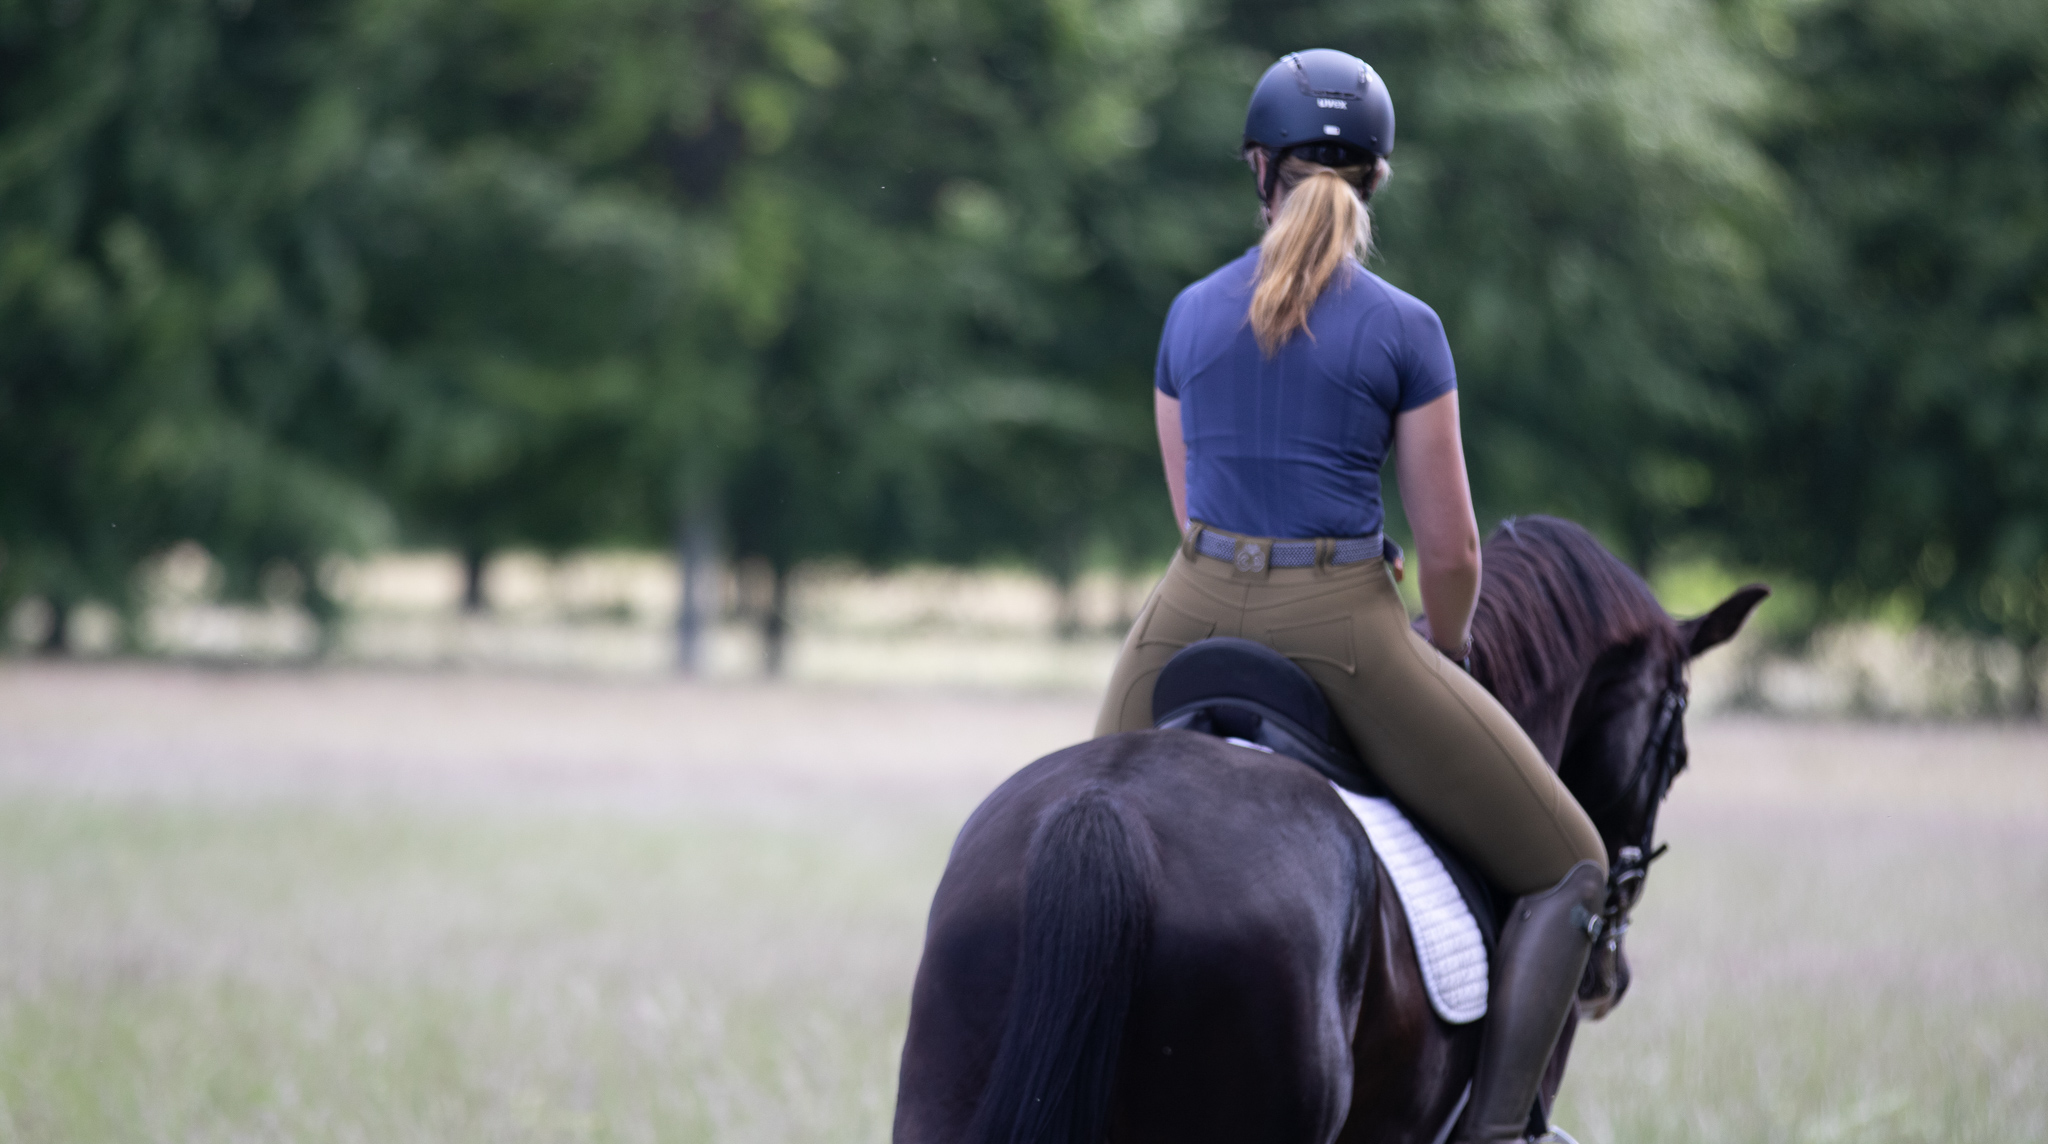 NEW Spring/Summer 22 Collection - Equestrian Queens! - Malgré Tout